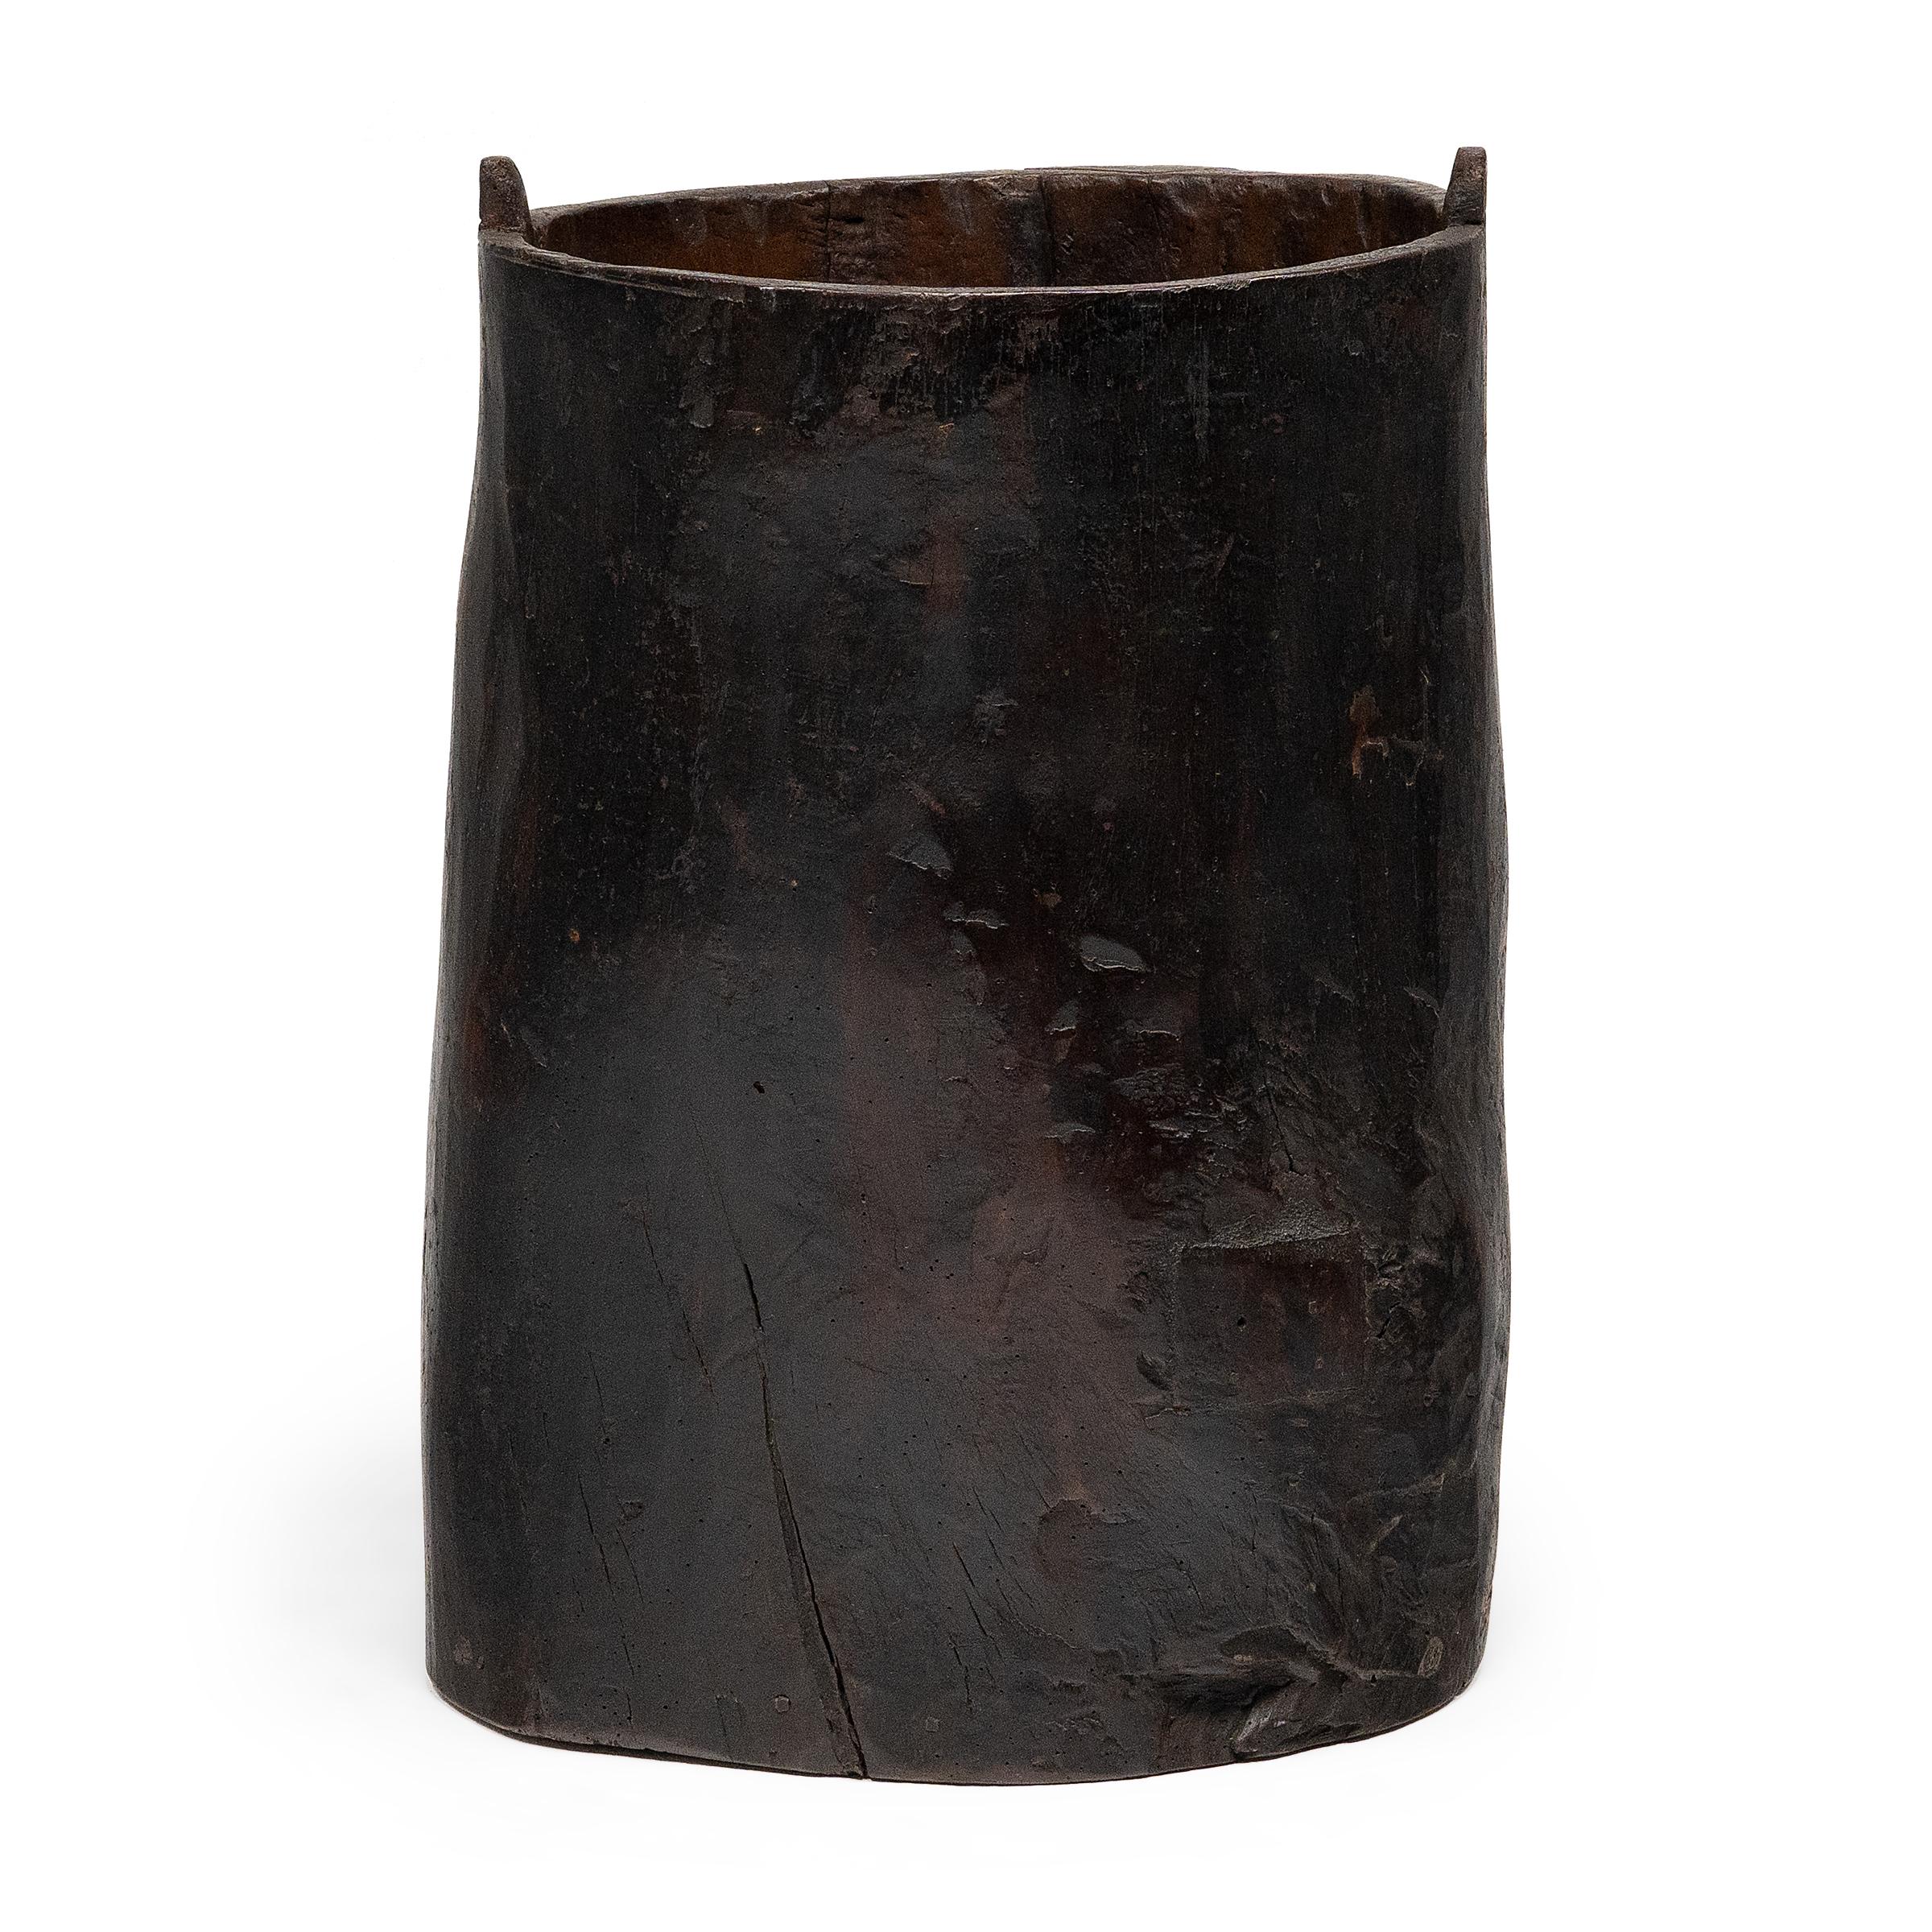 Rustic Chinese Tree Trunk Container, c. 1850